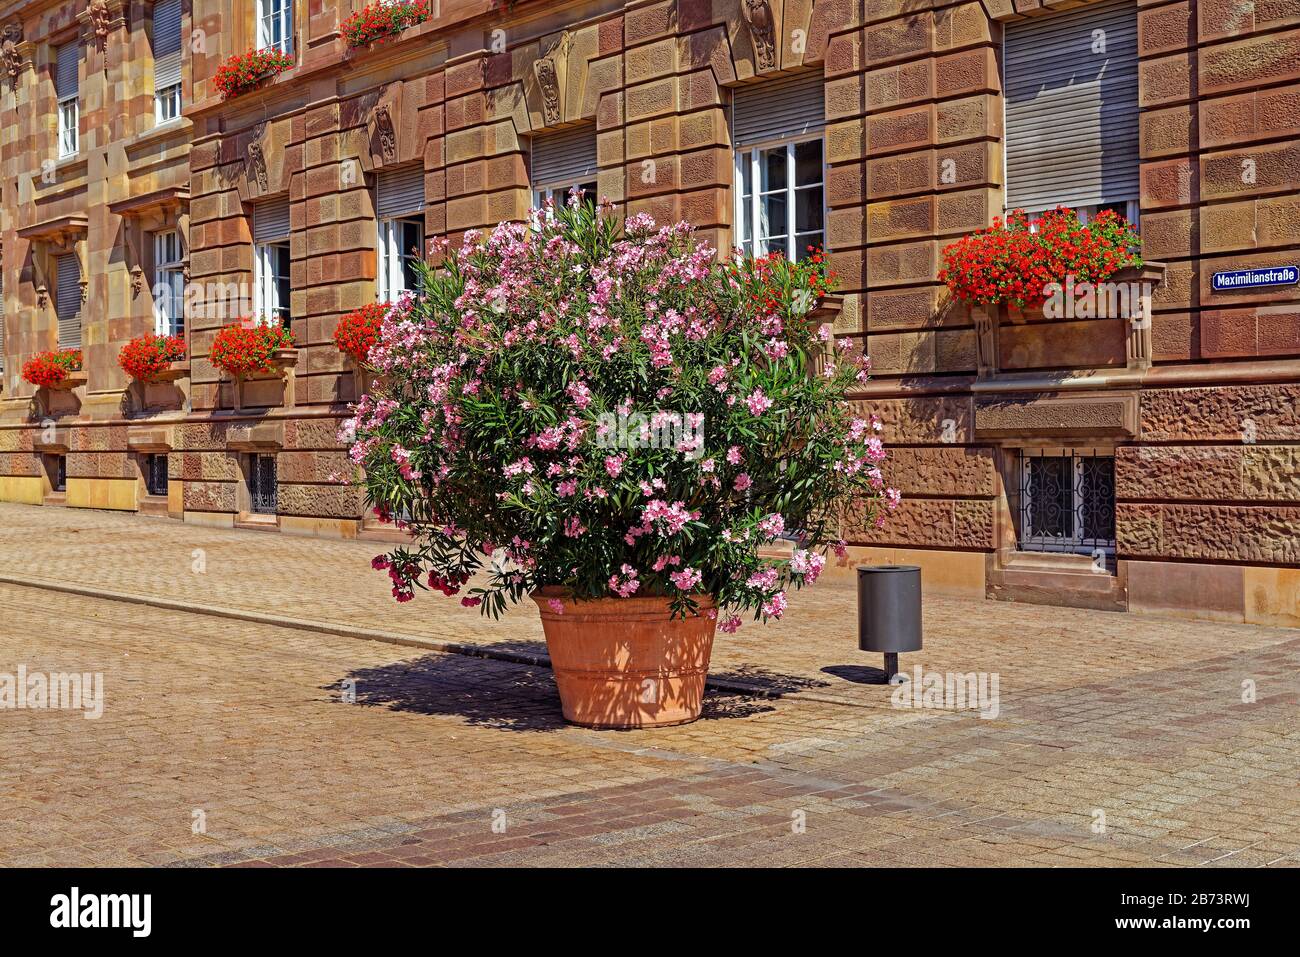 Germany, Rhineland-Palatinate, Speyer, cathedral place, SchUM town, town house, oleander, geraniums, place of interest, tourism, building, architectur Stock Photo